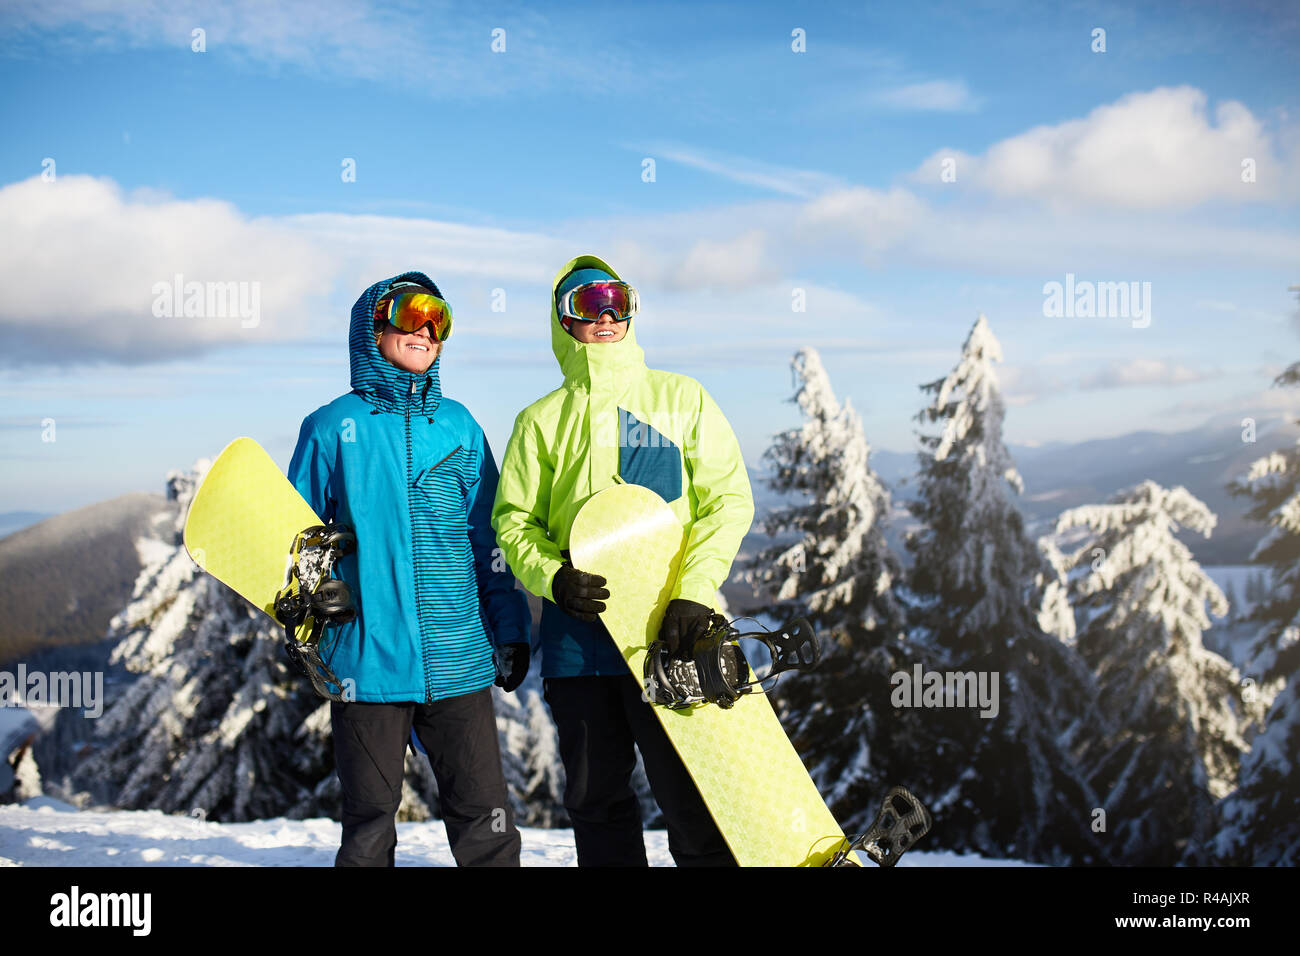 Two snowboarders posing at ski resort. Riders friends carrying their snowboards through forest for backcountry freeride and wearing reflective goggles, colorful fashion outfit. Copyspace area. Stock Photo